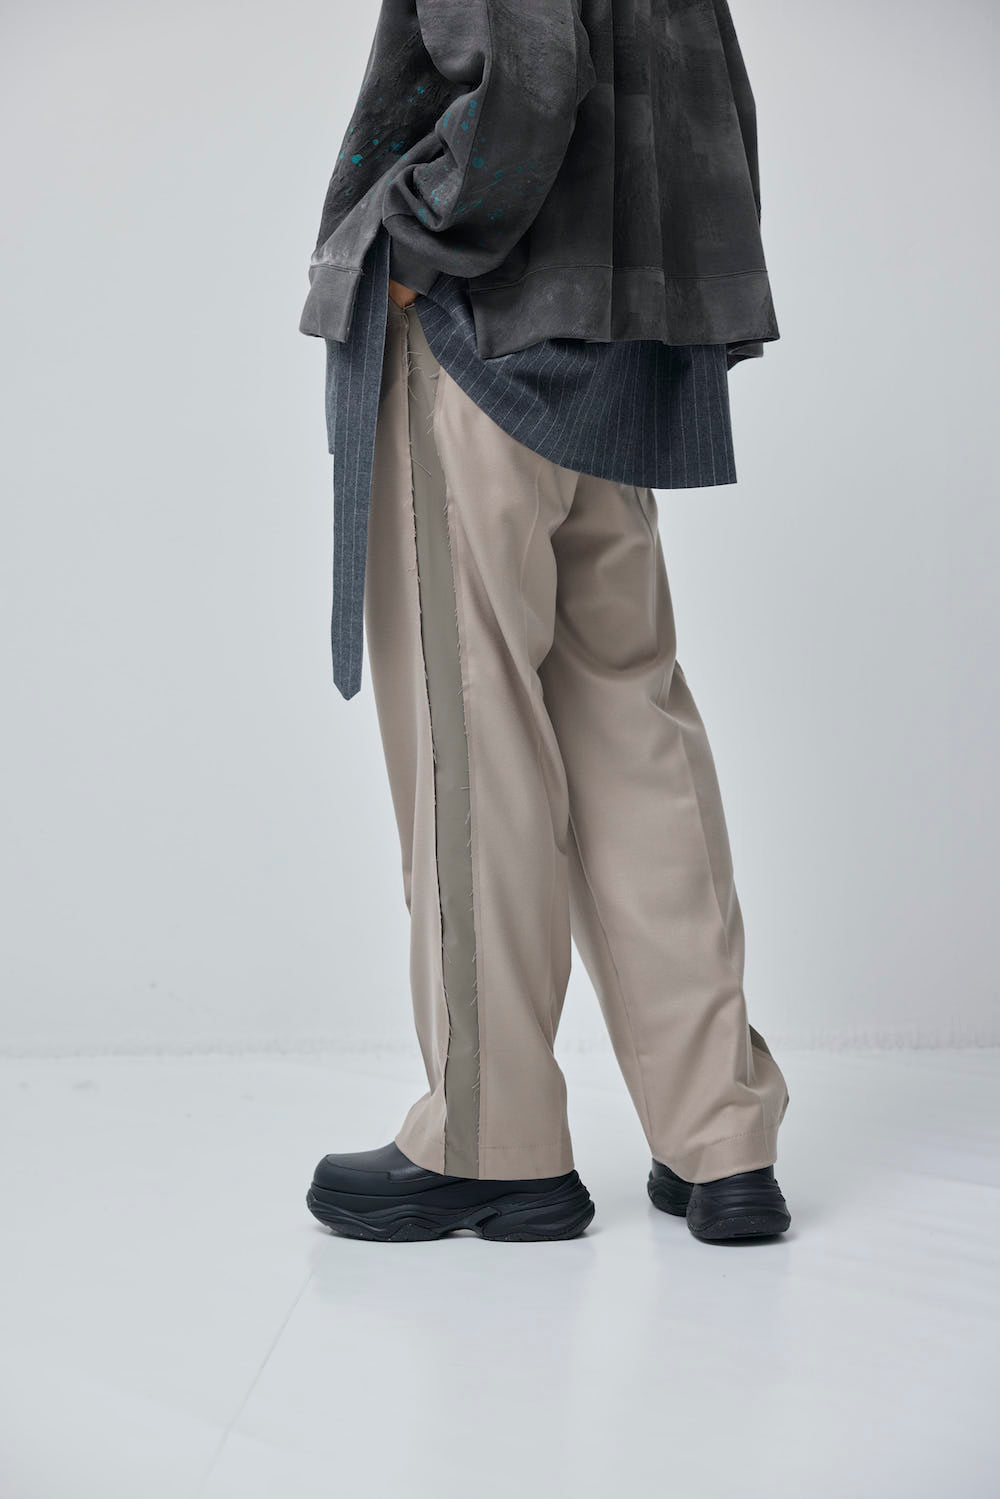 LB23AW-PT04-CWE | Comical Warm Excellent Sideline Wrapped Trousers | WOOD 